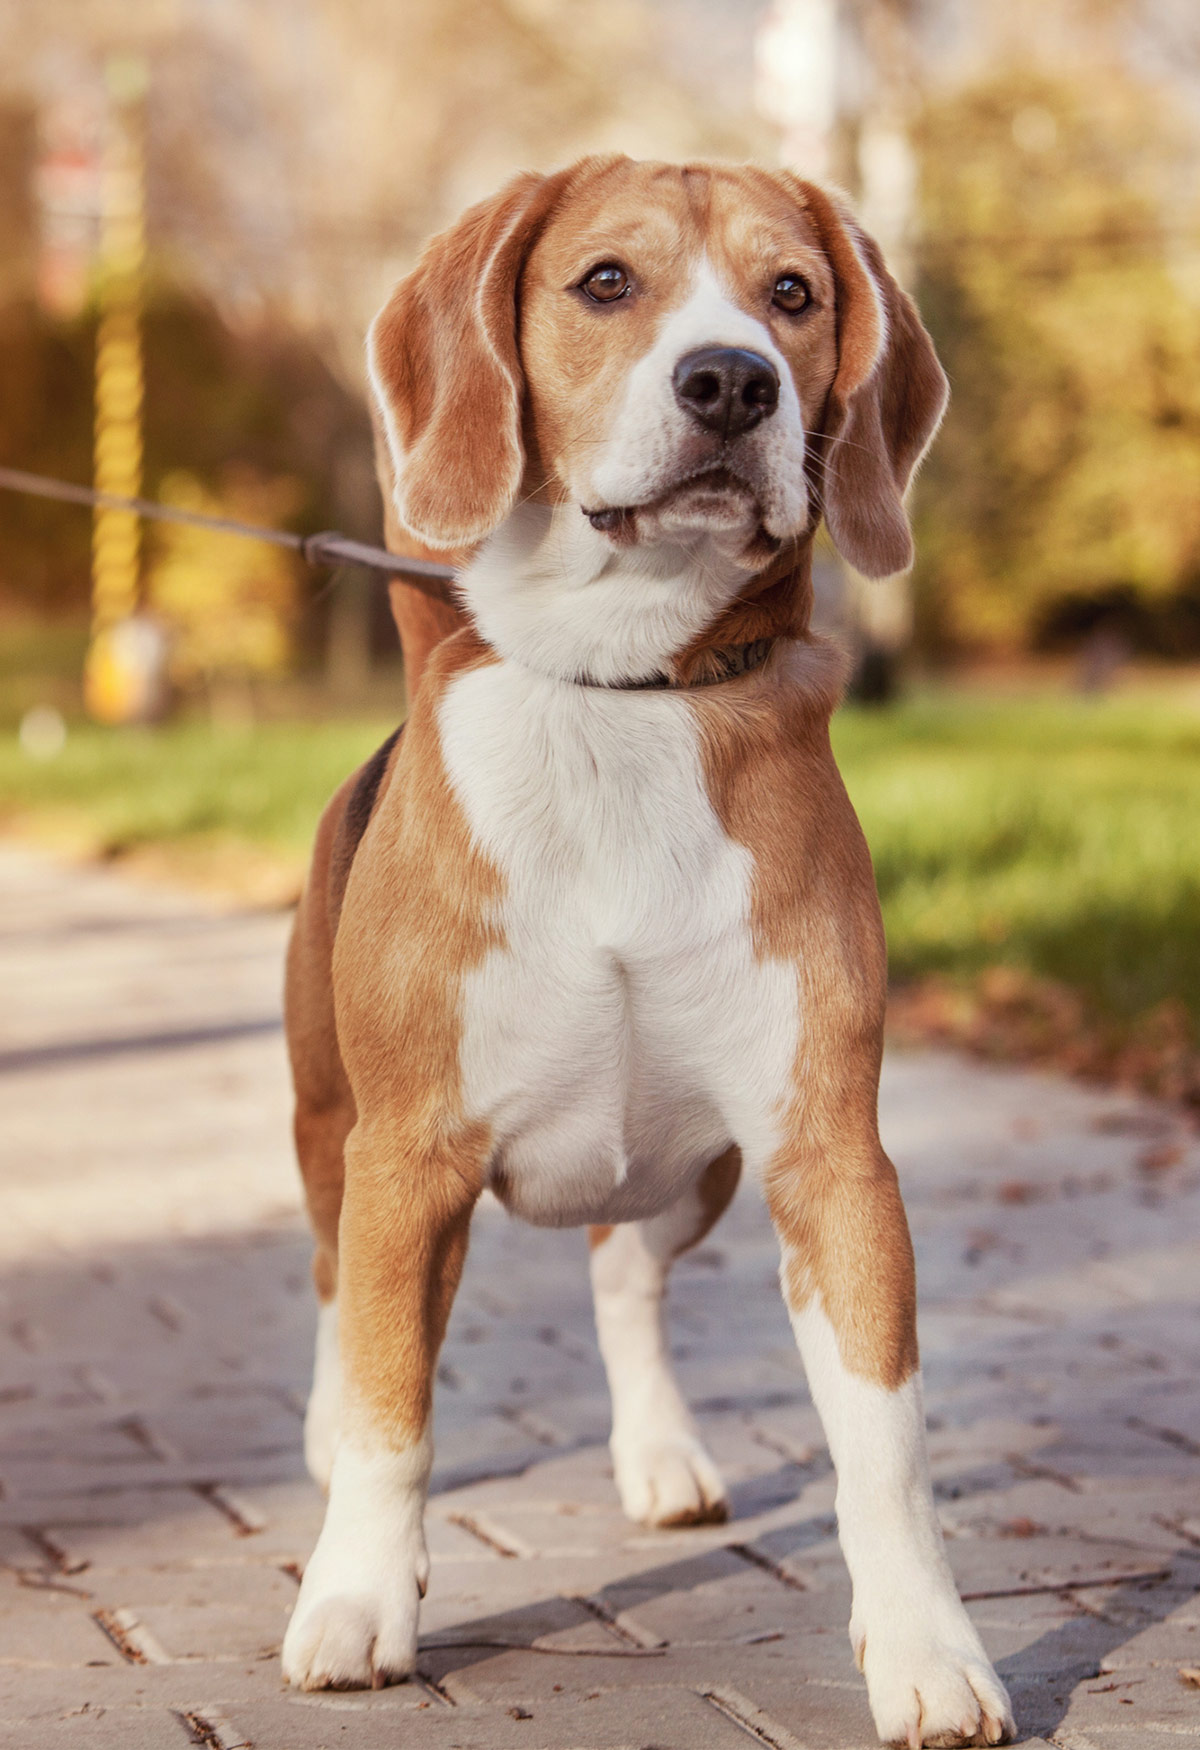 Lemon Beagle 33 Fantastic Facts From History To Present Day